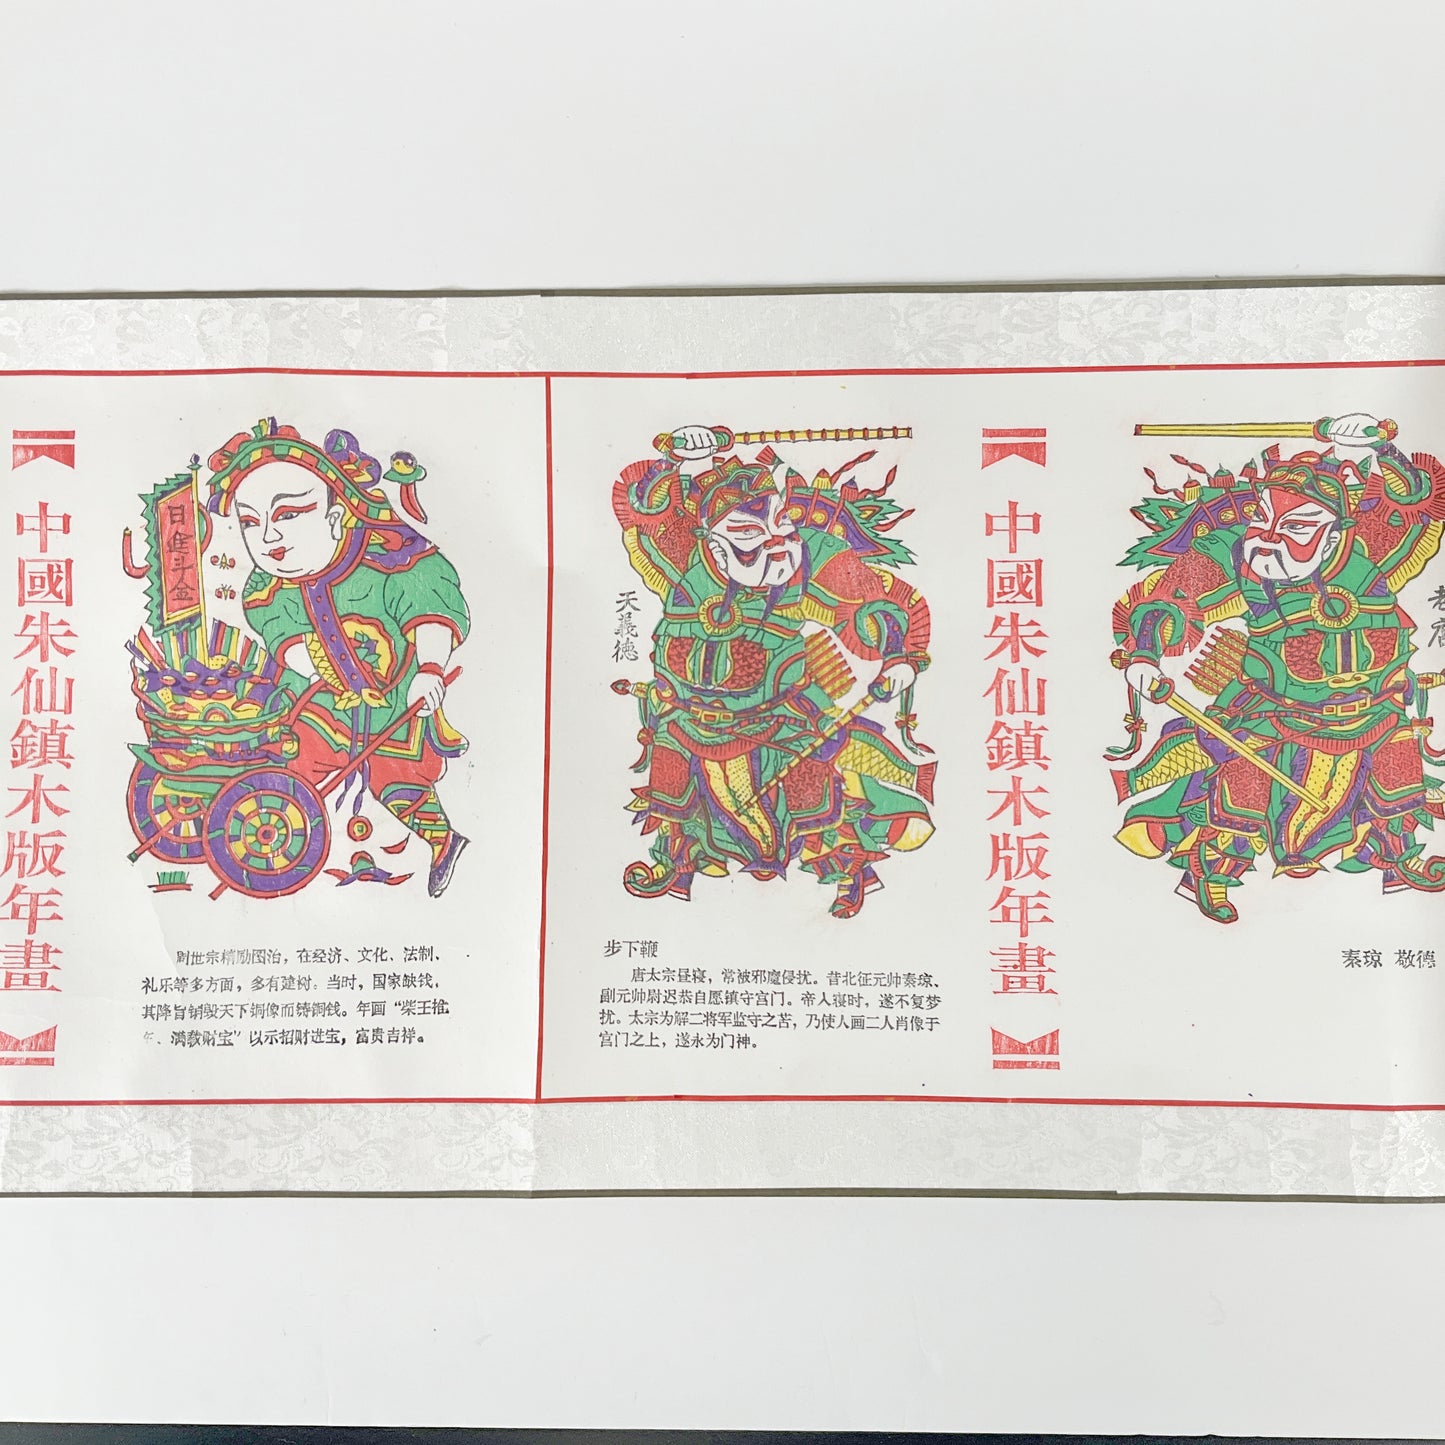 The Woodblock New Year Prints of Zhuxian Town in China